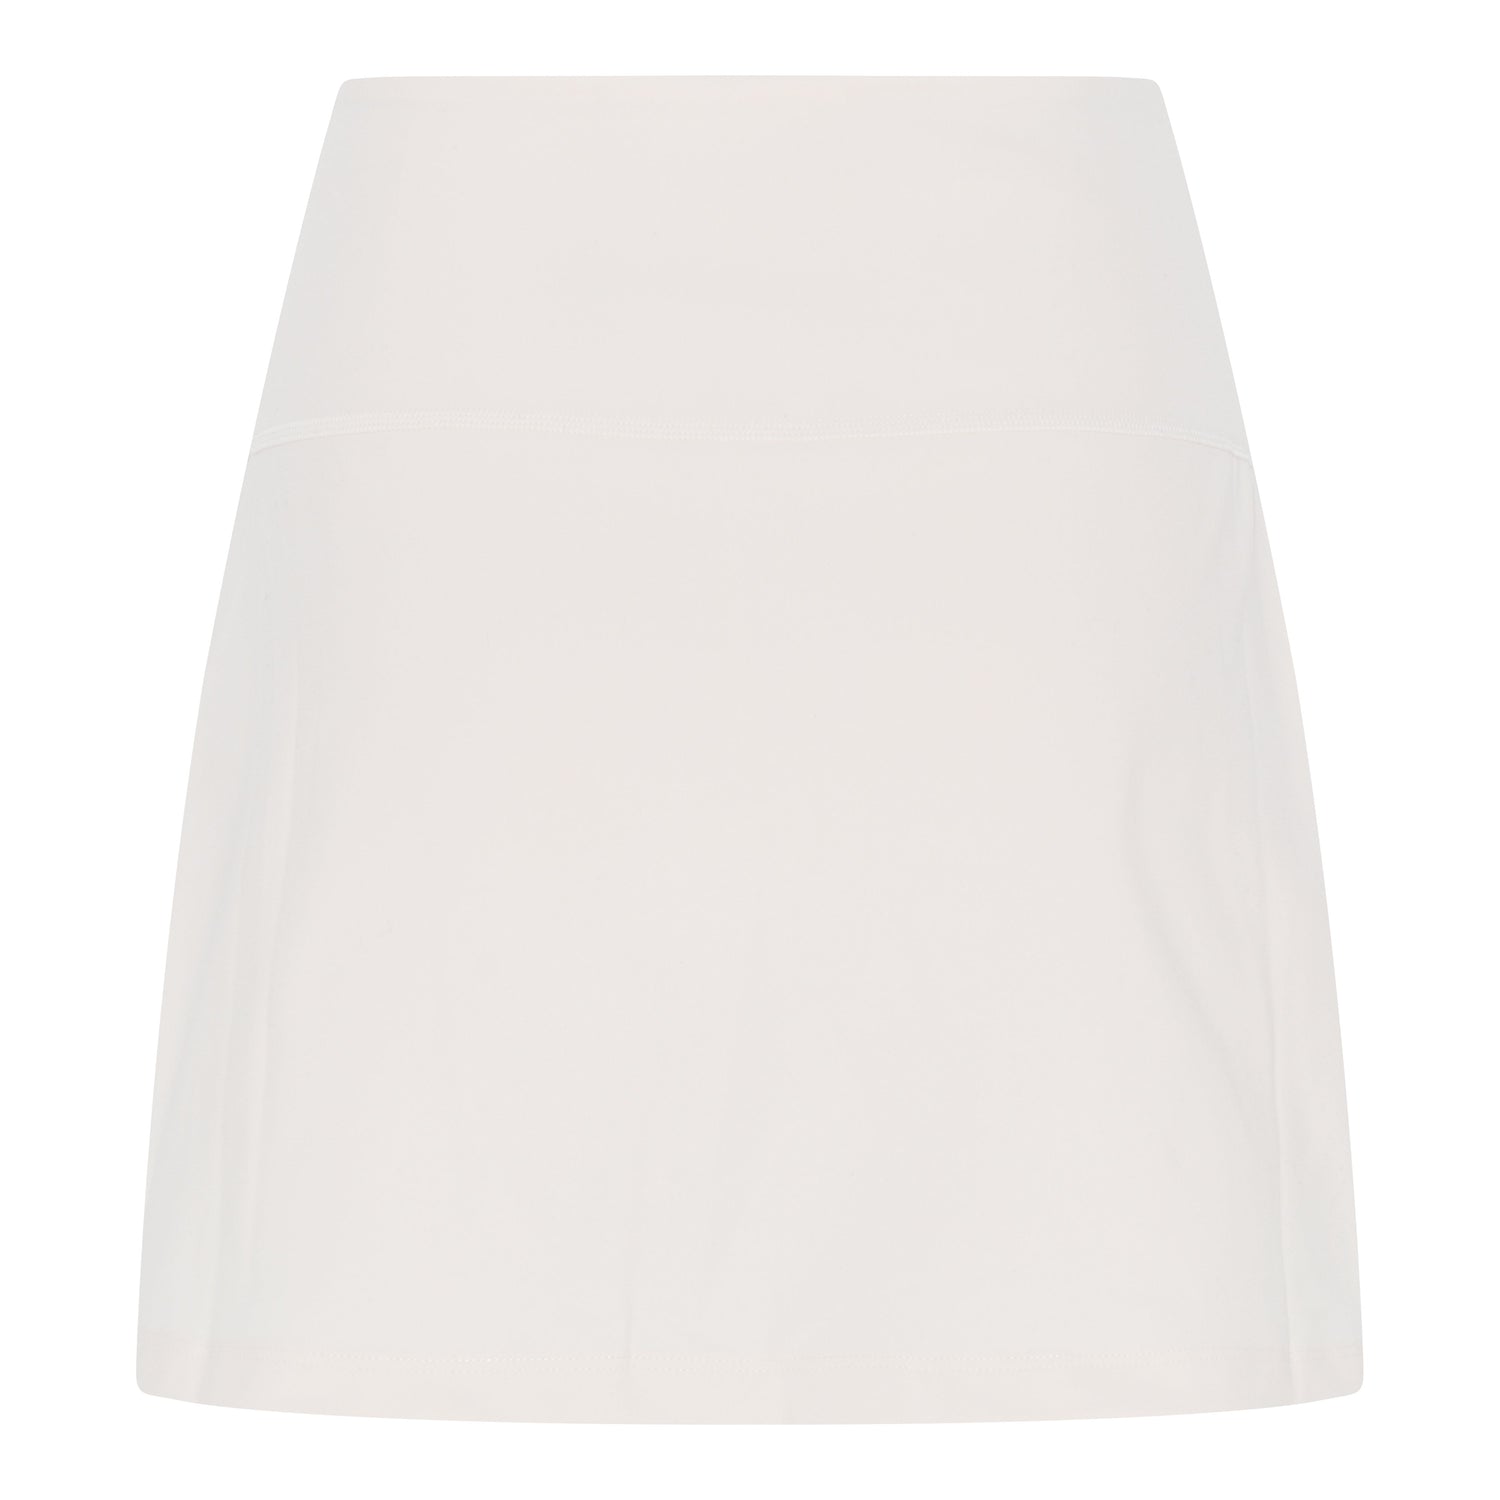 Girlfriend Collective The Skort High-Rise - Made from Recycled Plastic Bottles Black Skirt